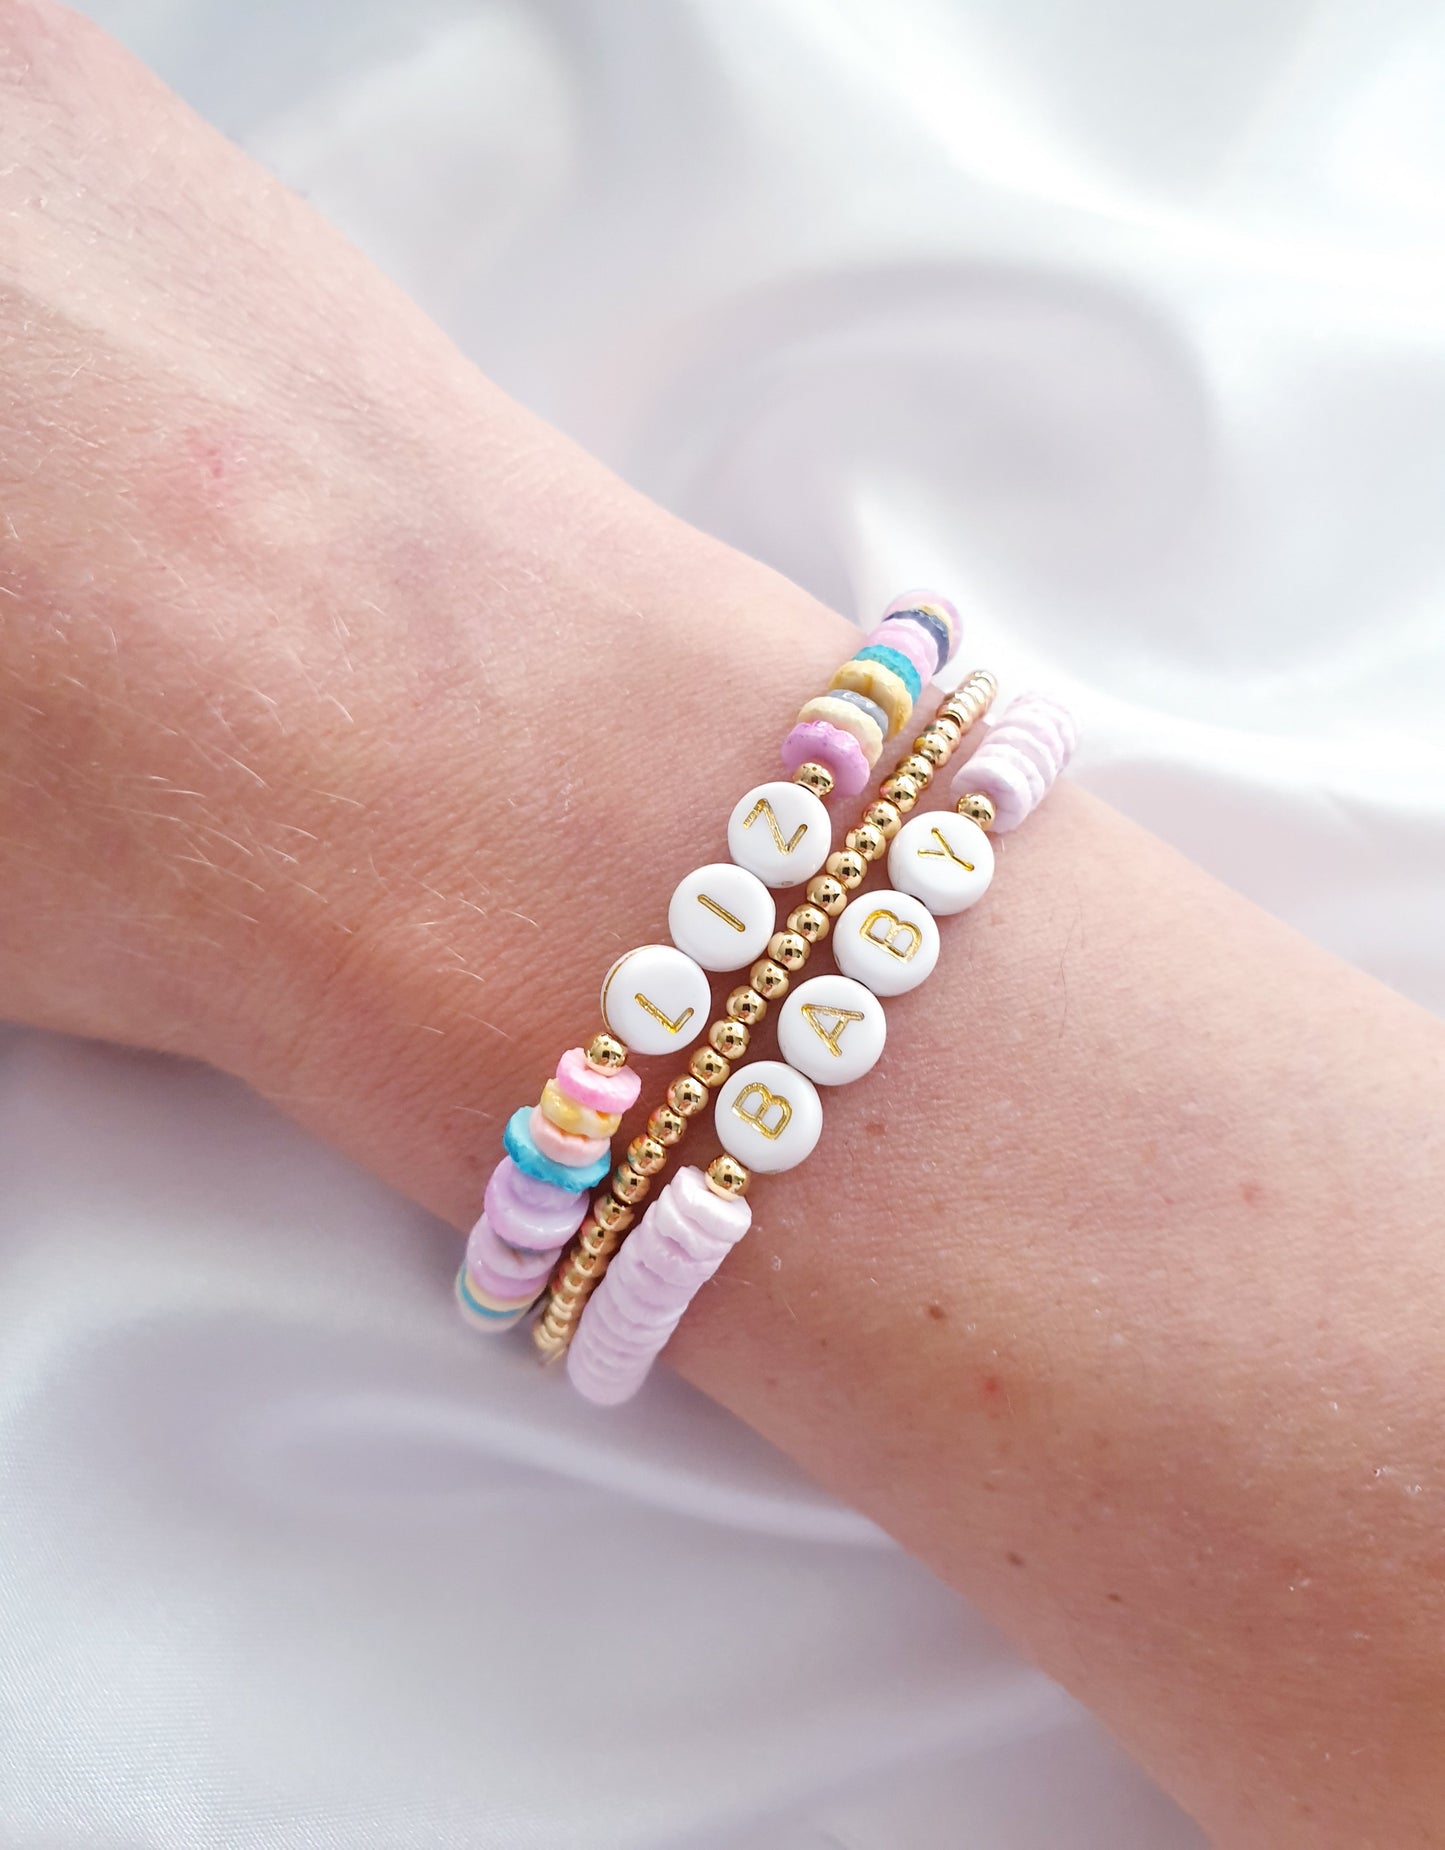 Personalised Beaded Name Bracelet - Nacreous Stamp Beads a.k.a EYE CANDY